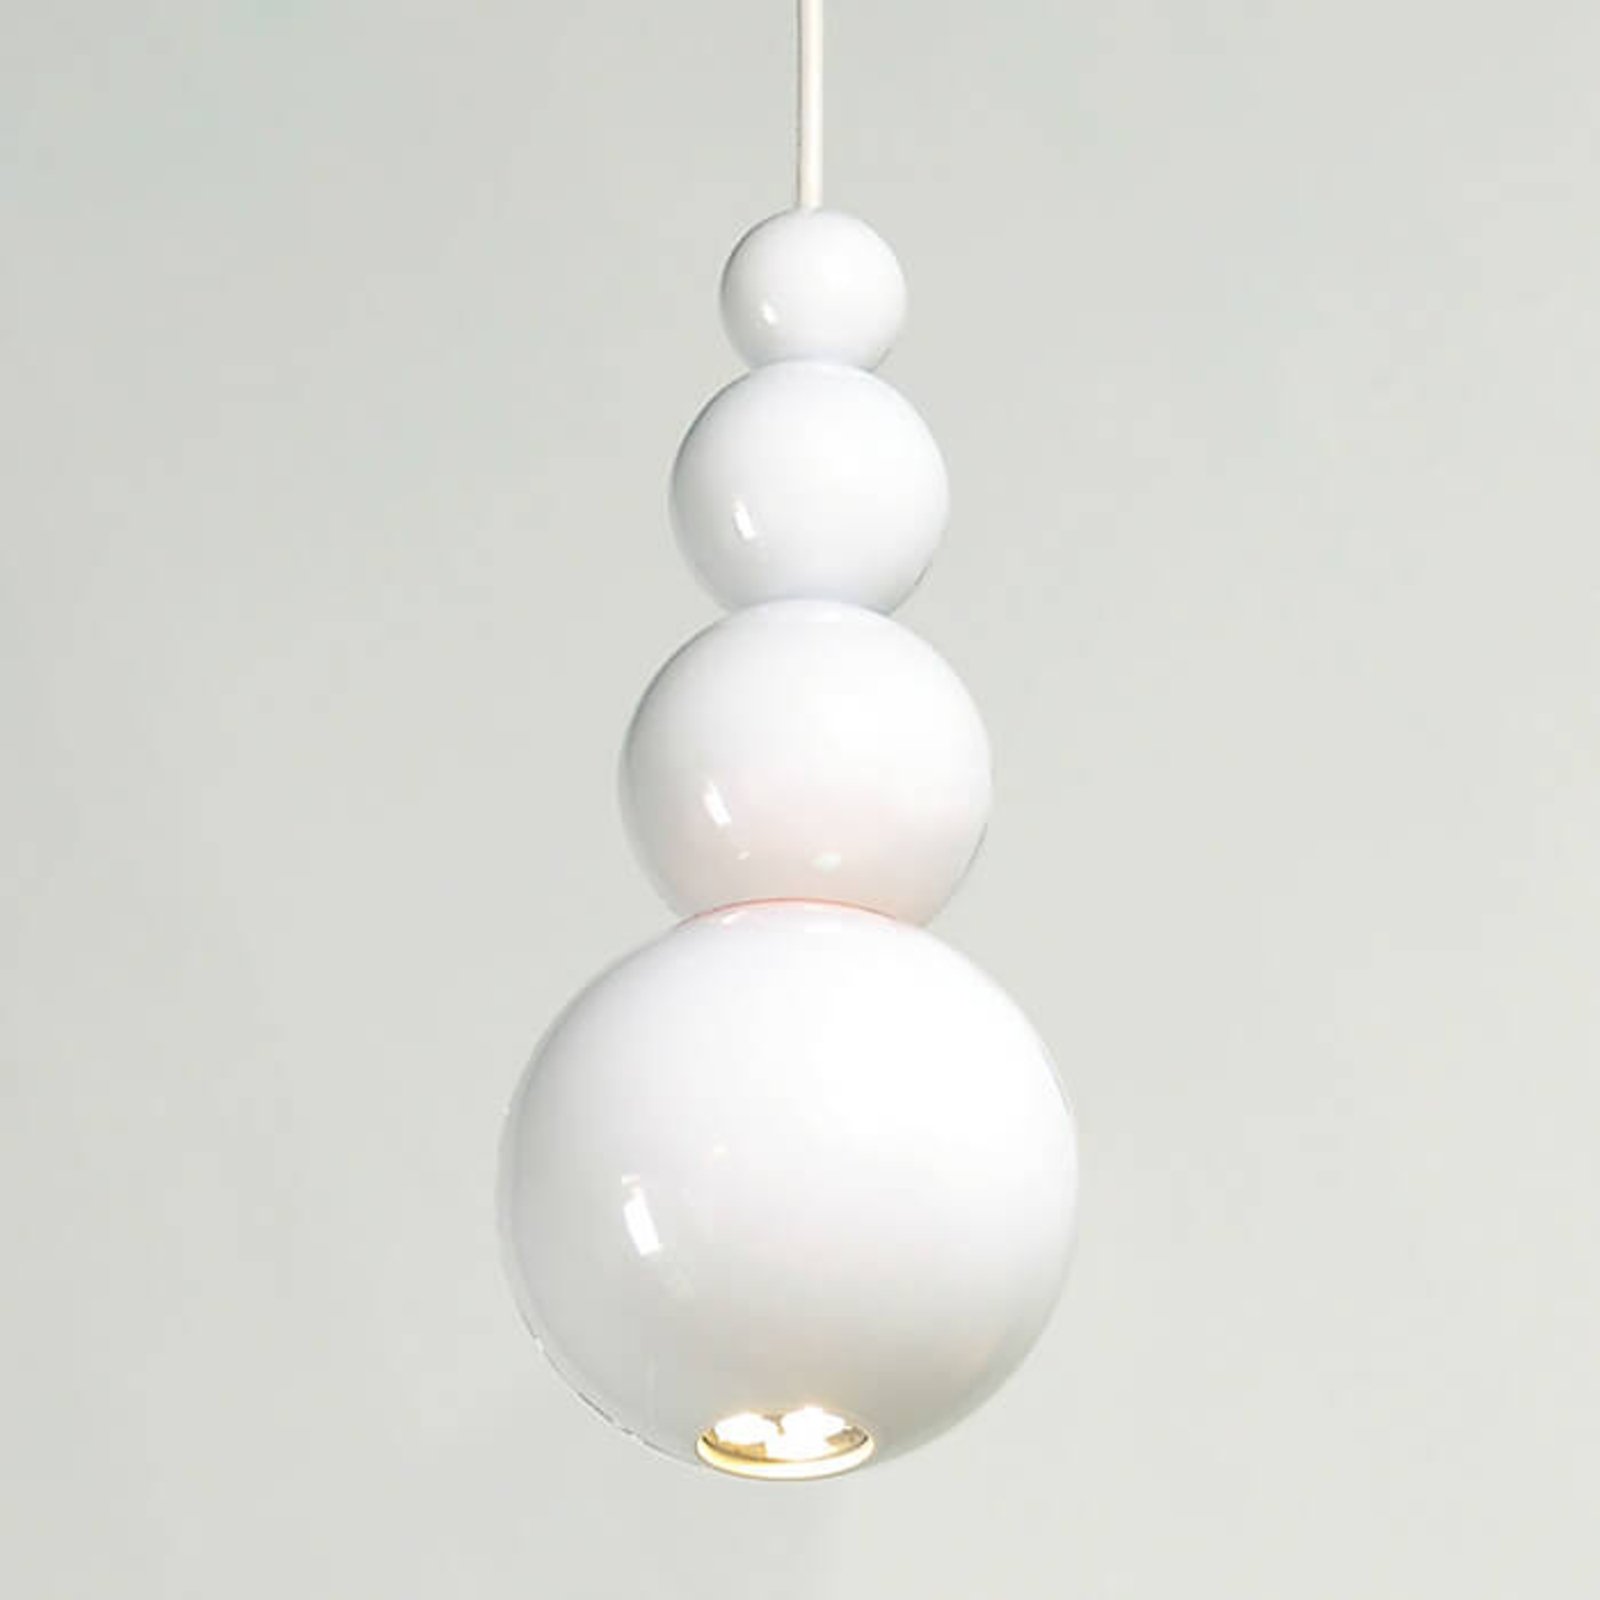 Innermost Bubble - hanglamp in wit